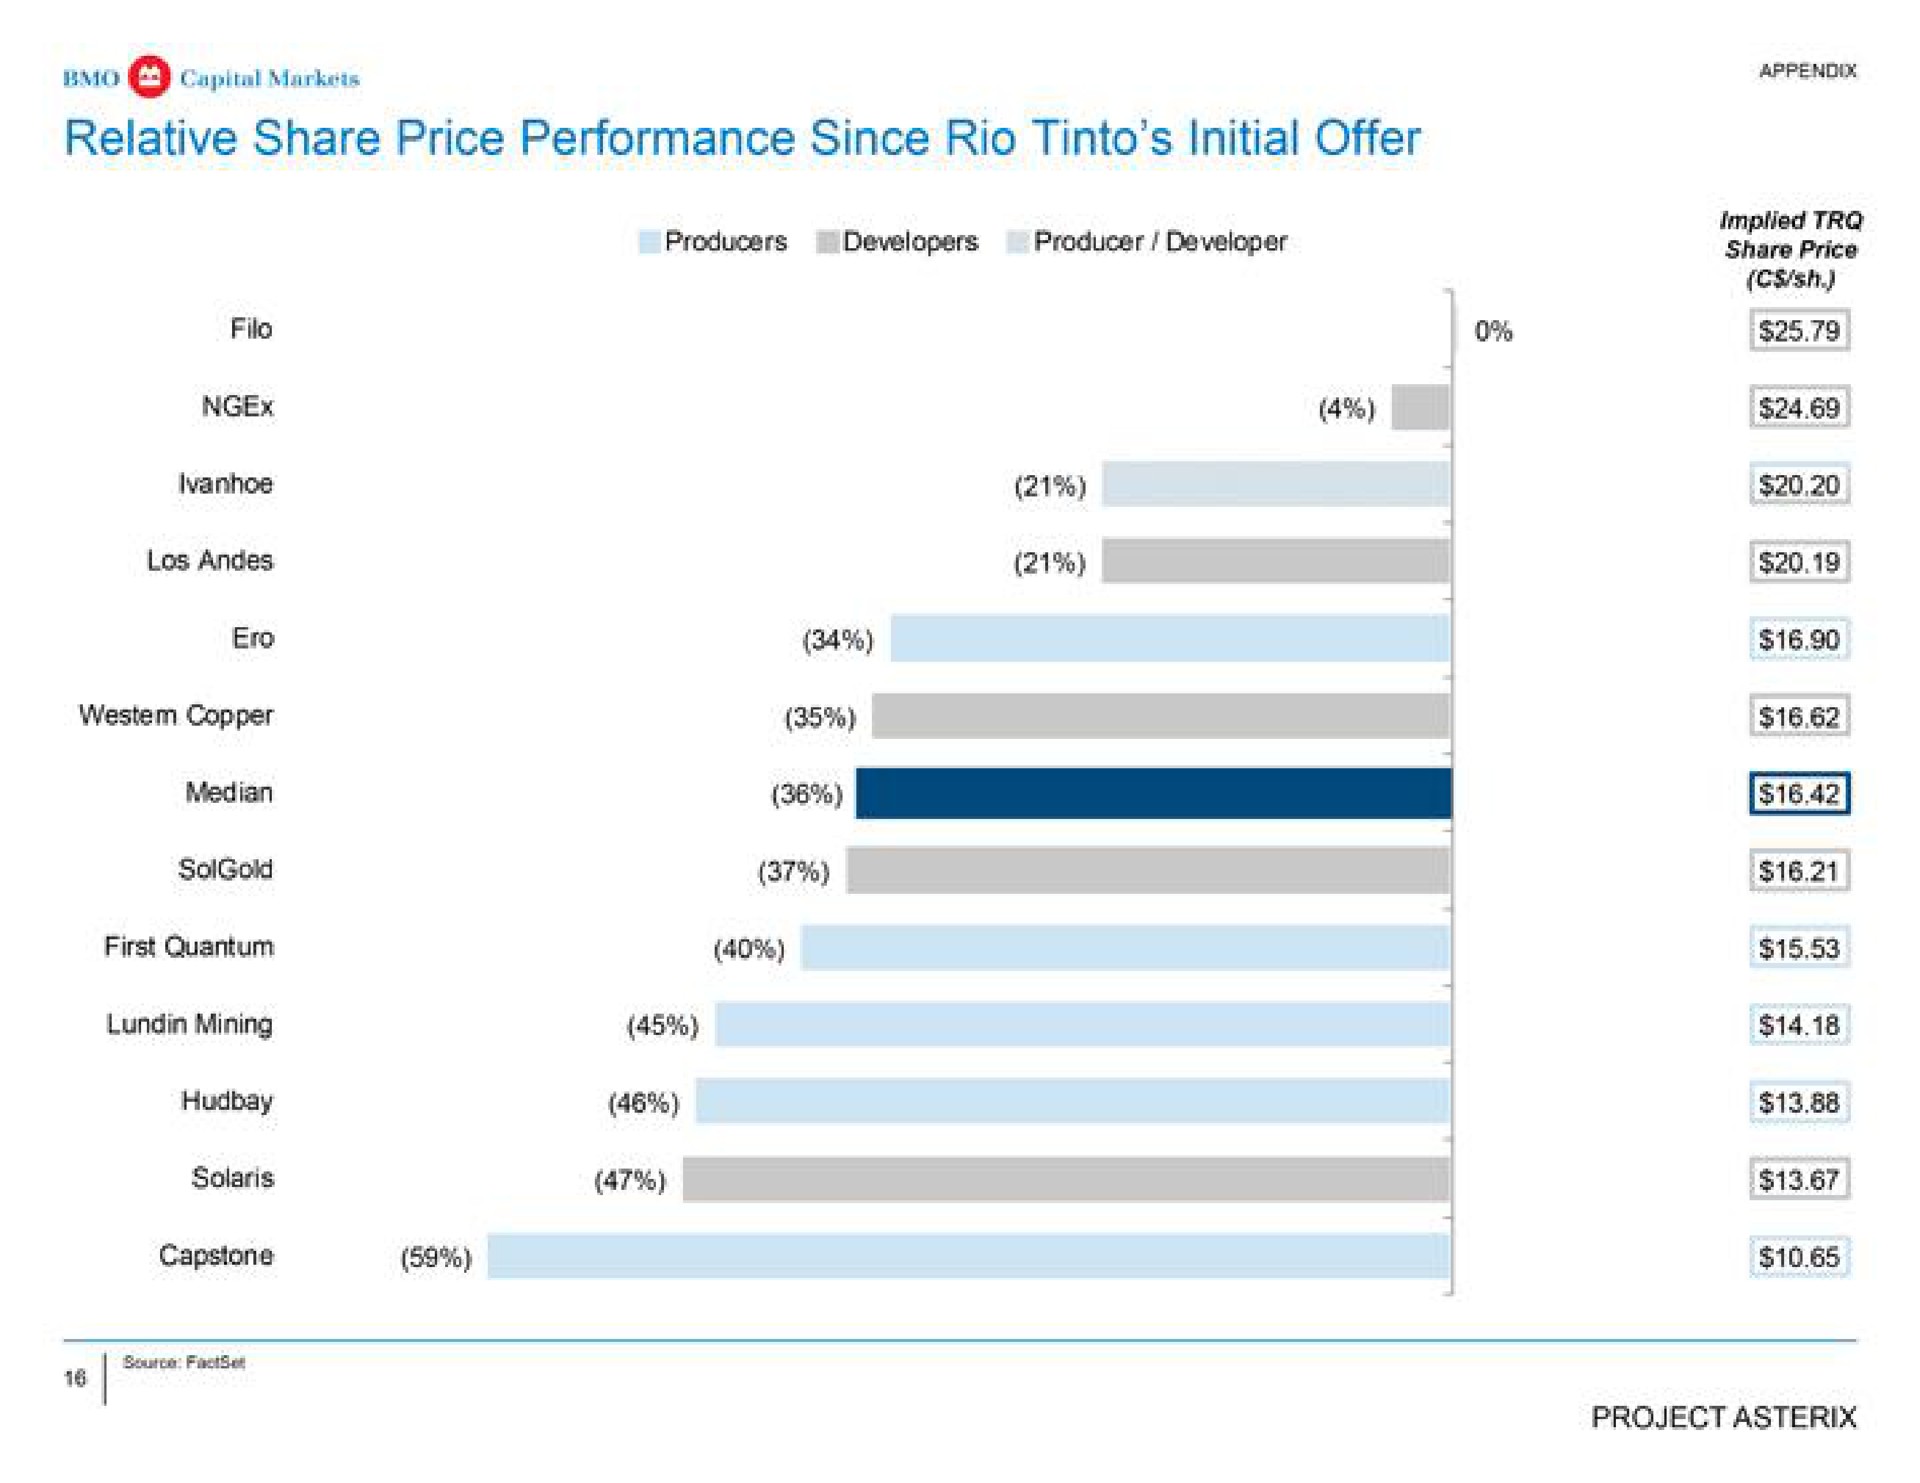 relative share price performance since rio initial offer median | BMO Capital Markets